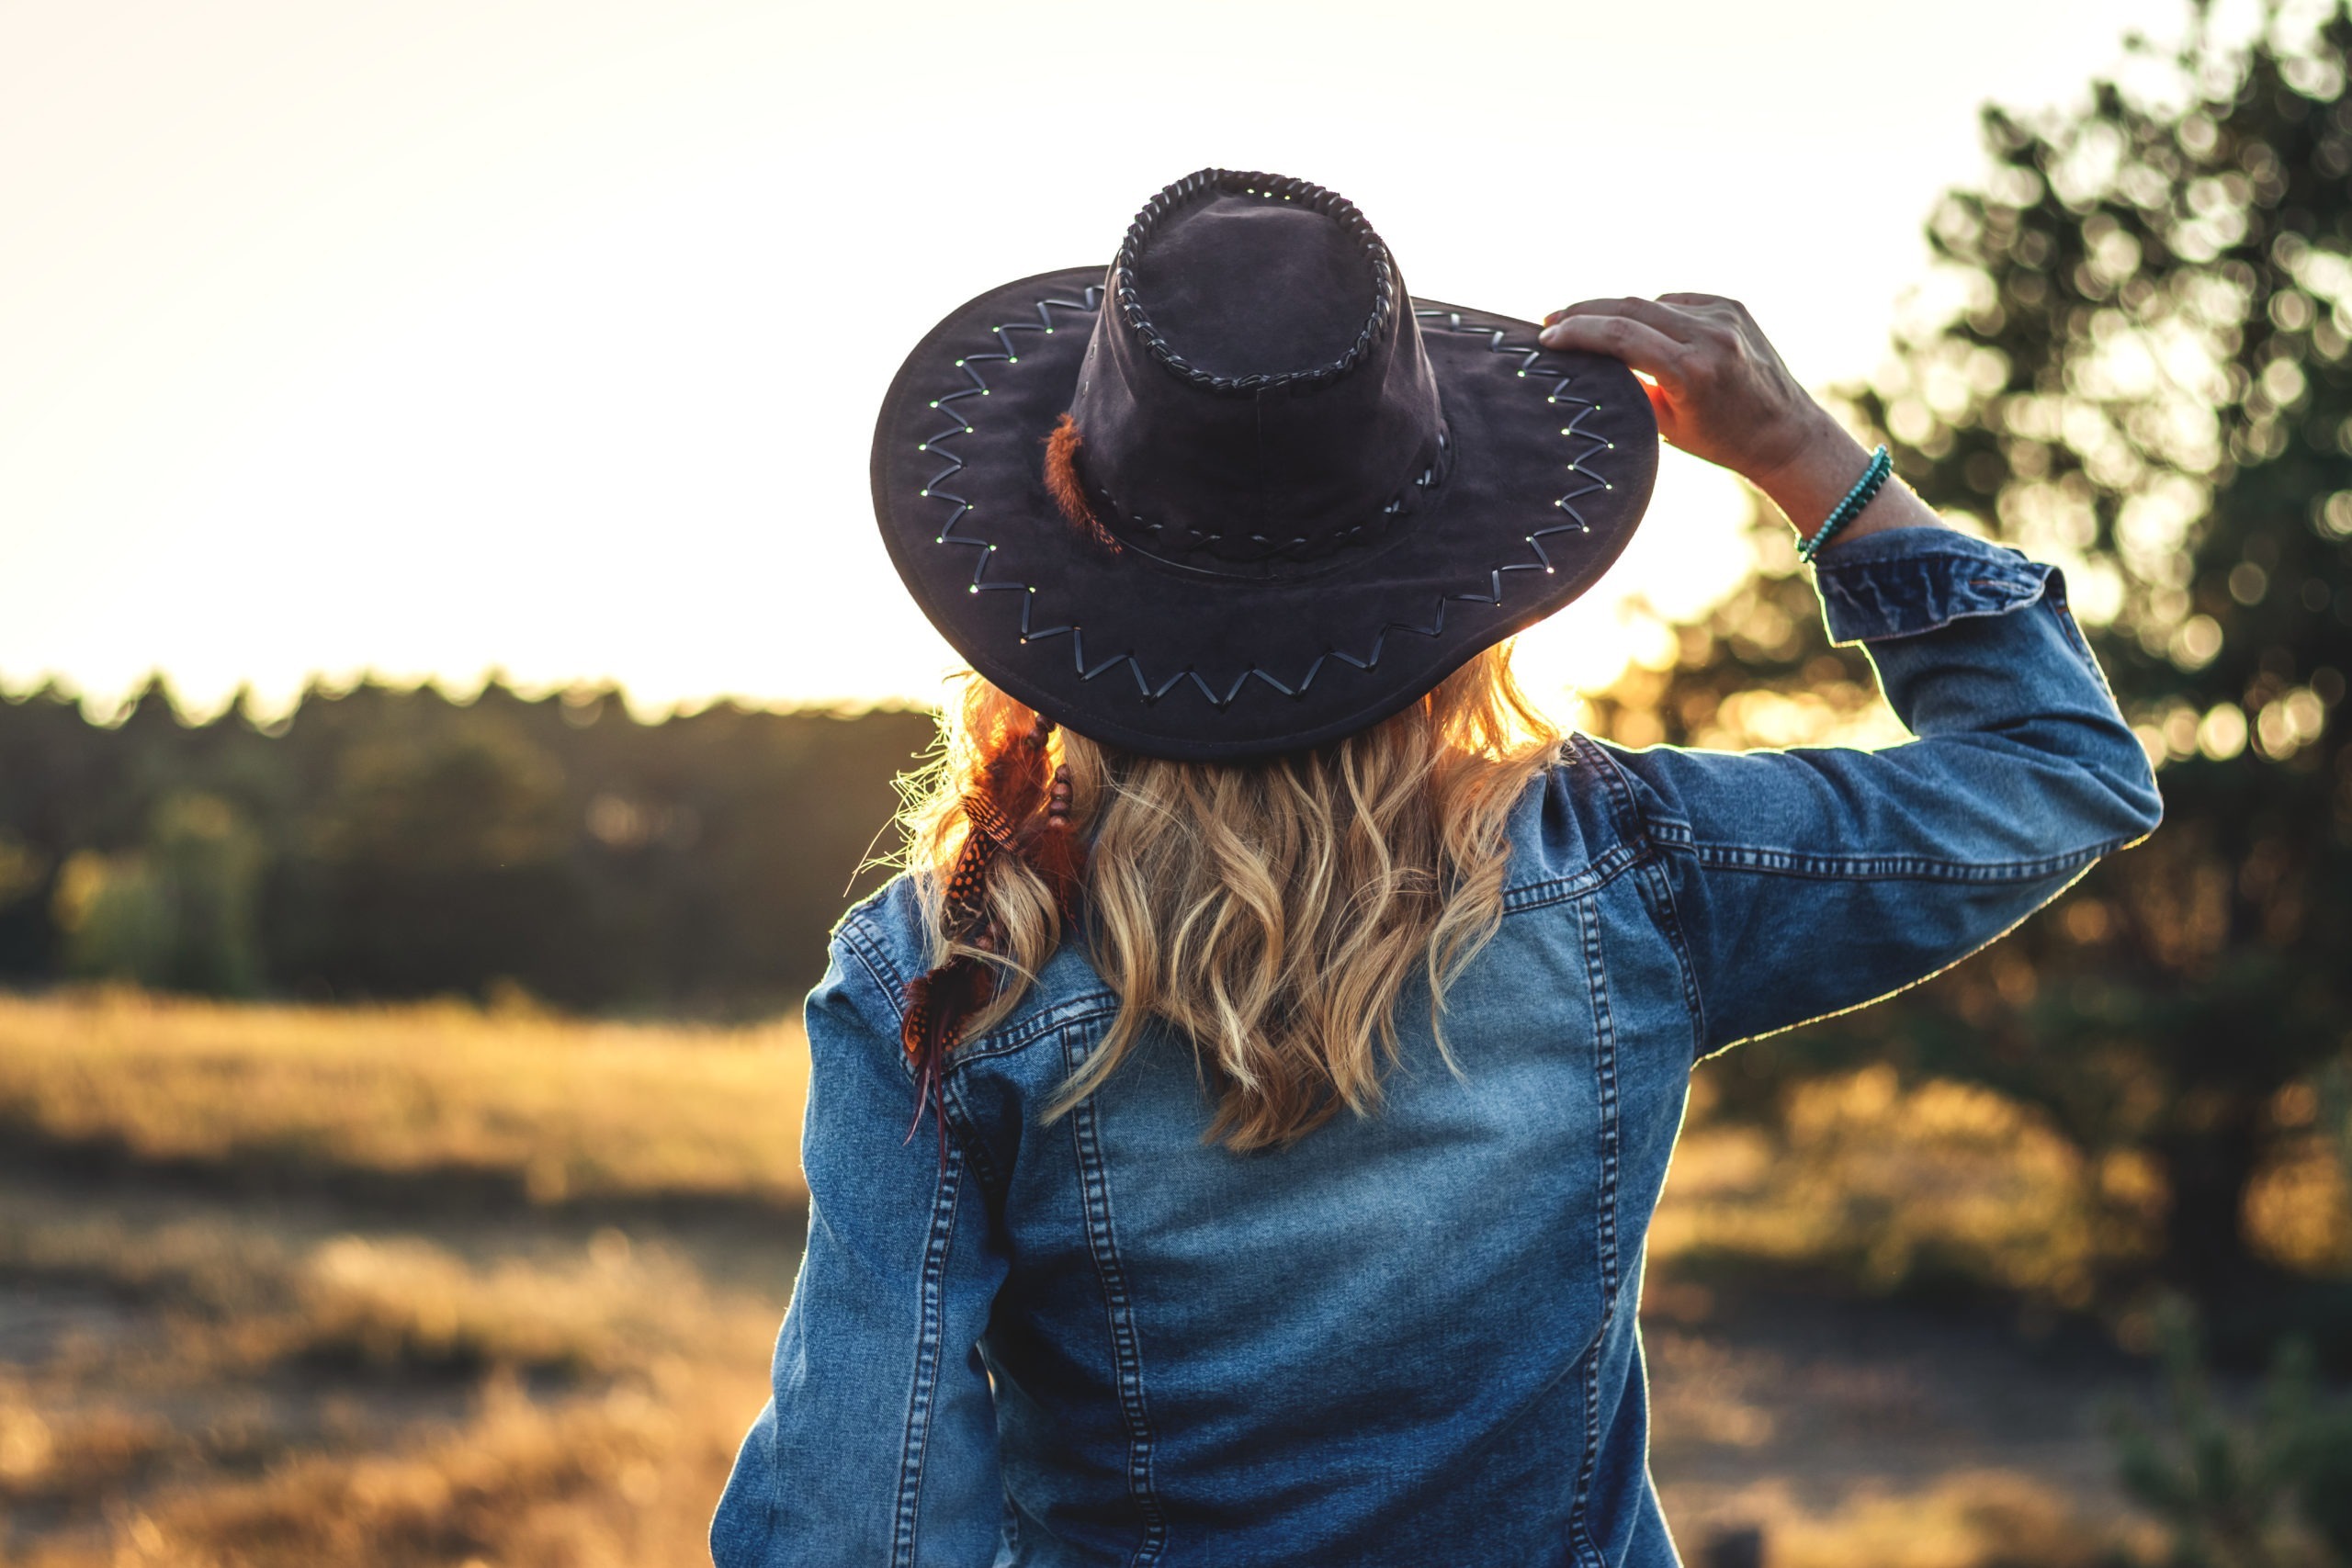 a woman with her back to the camera wearing a cowboy hat and denim jacket enjoying the sunset outdoors